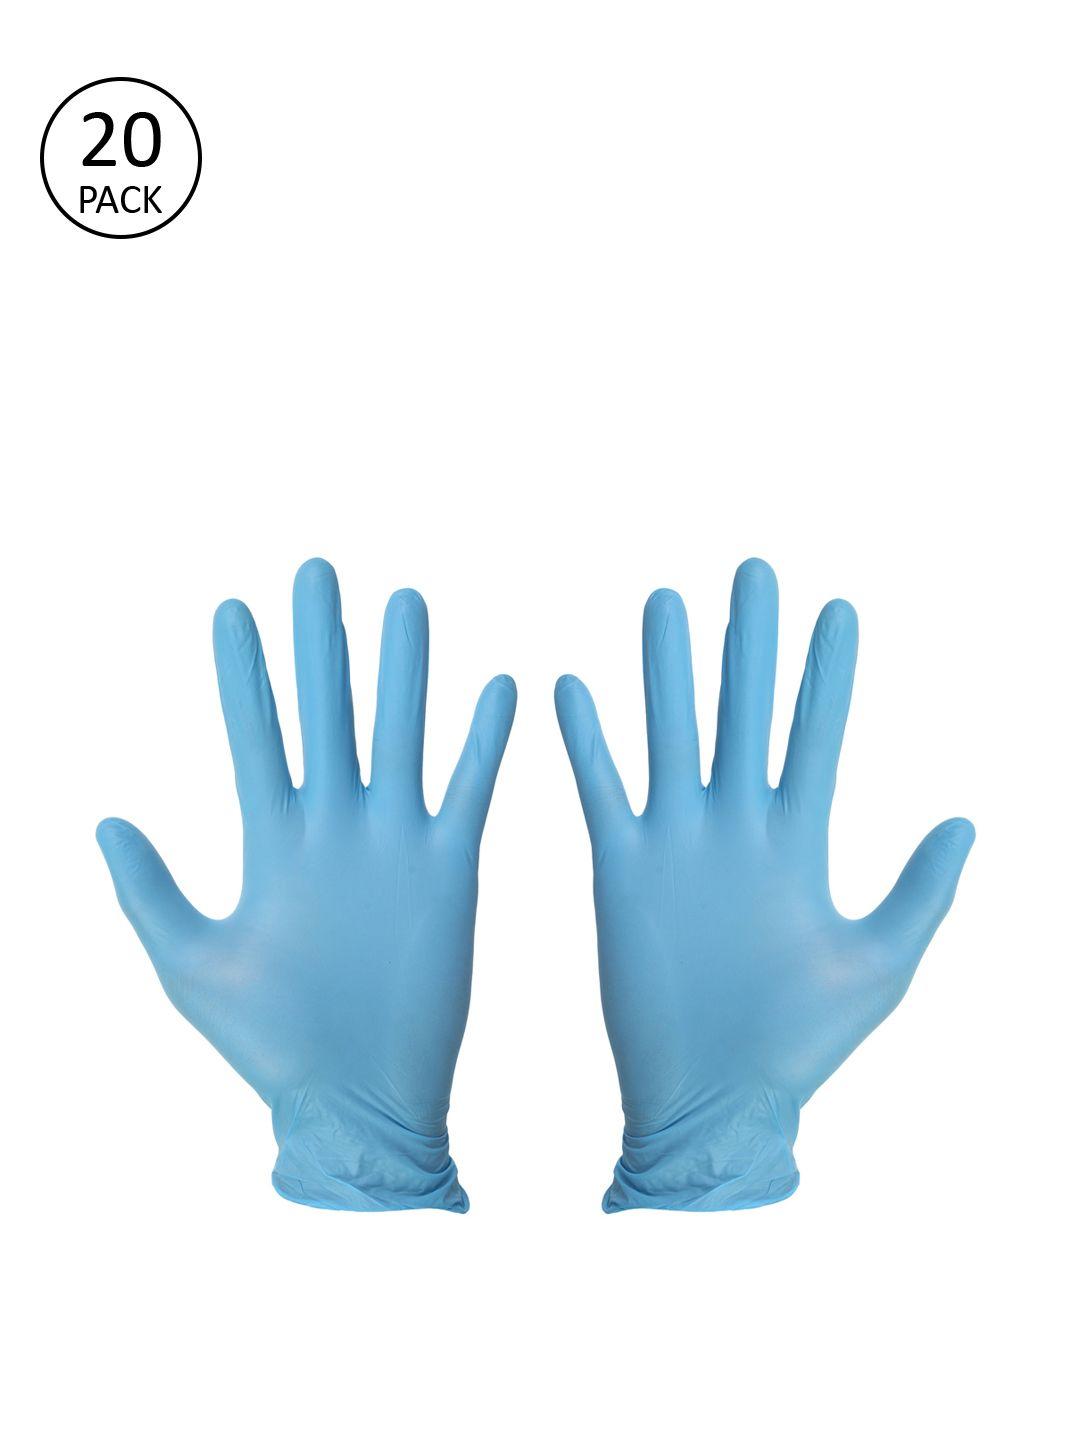 london fashion hob unisex pack of 20 blue solid surgical disposable hand gloves